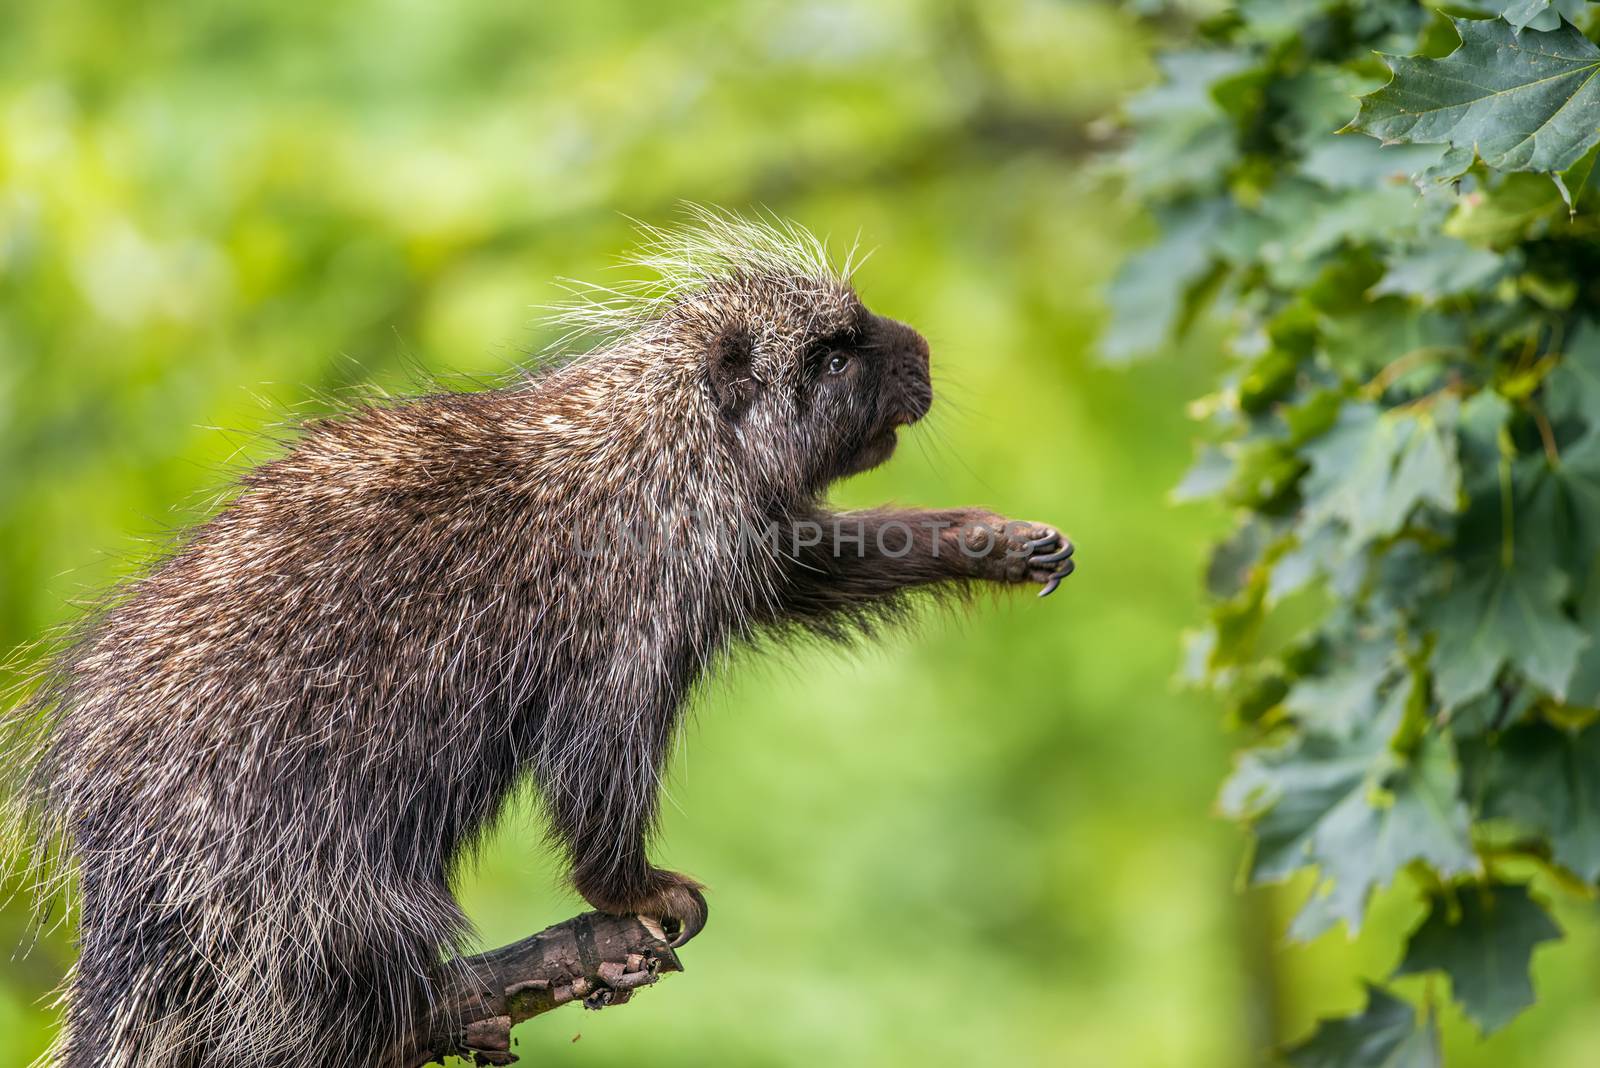 North American porcupine reaching for leaves by nickfox